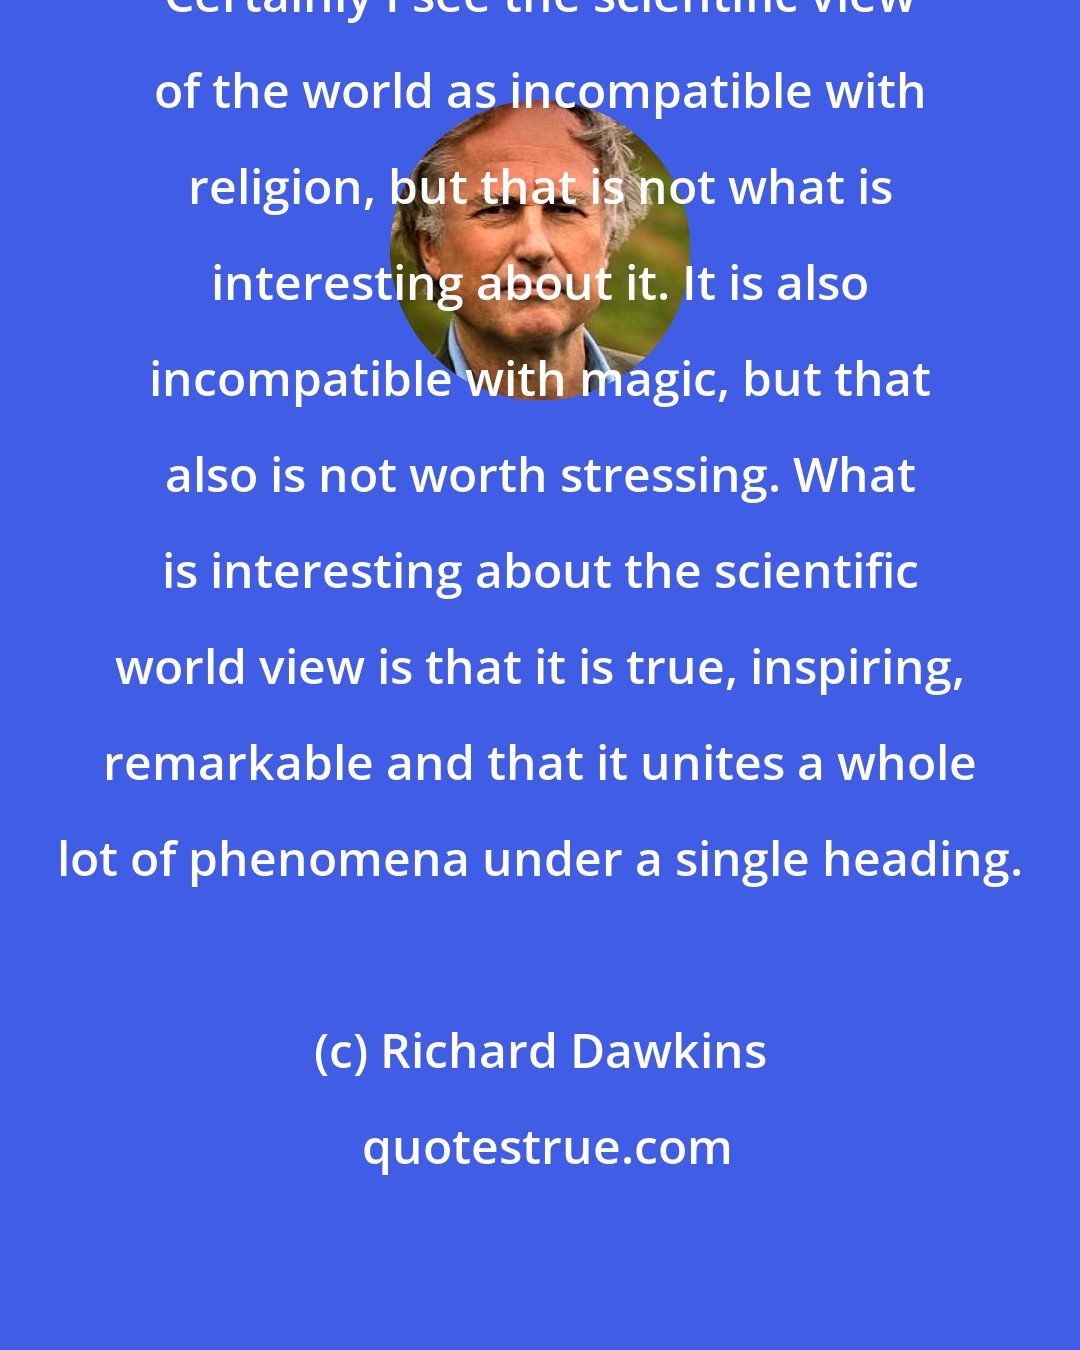 Richard Dawkins: Certainly I see the scientific view of the world as incompatible with religion, but that is not what is interesting about it. It is also incompatible with magic, but that also is not worth stressing. What is interesting about the scientific world view is that it is true, inspiring, remarkable and that it unites a whole lot of phenomena under a single heading.